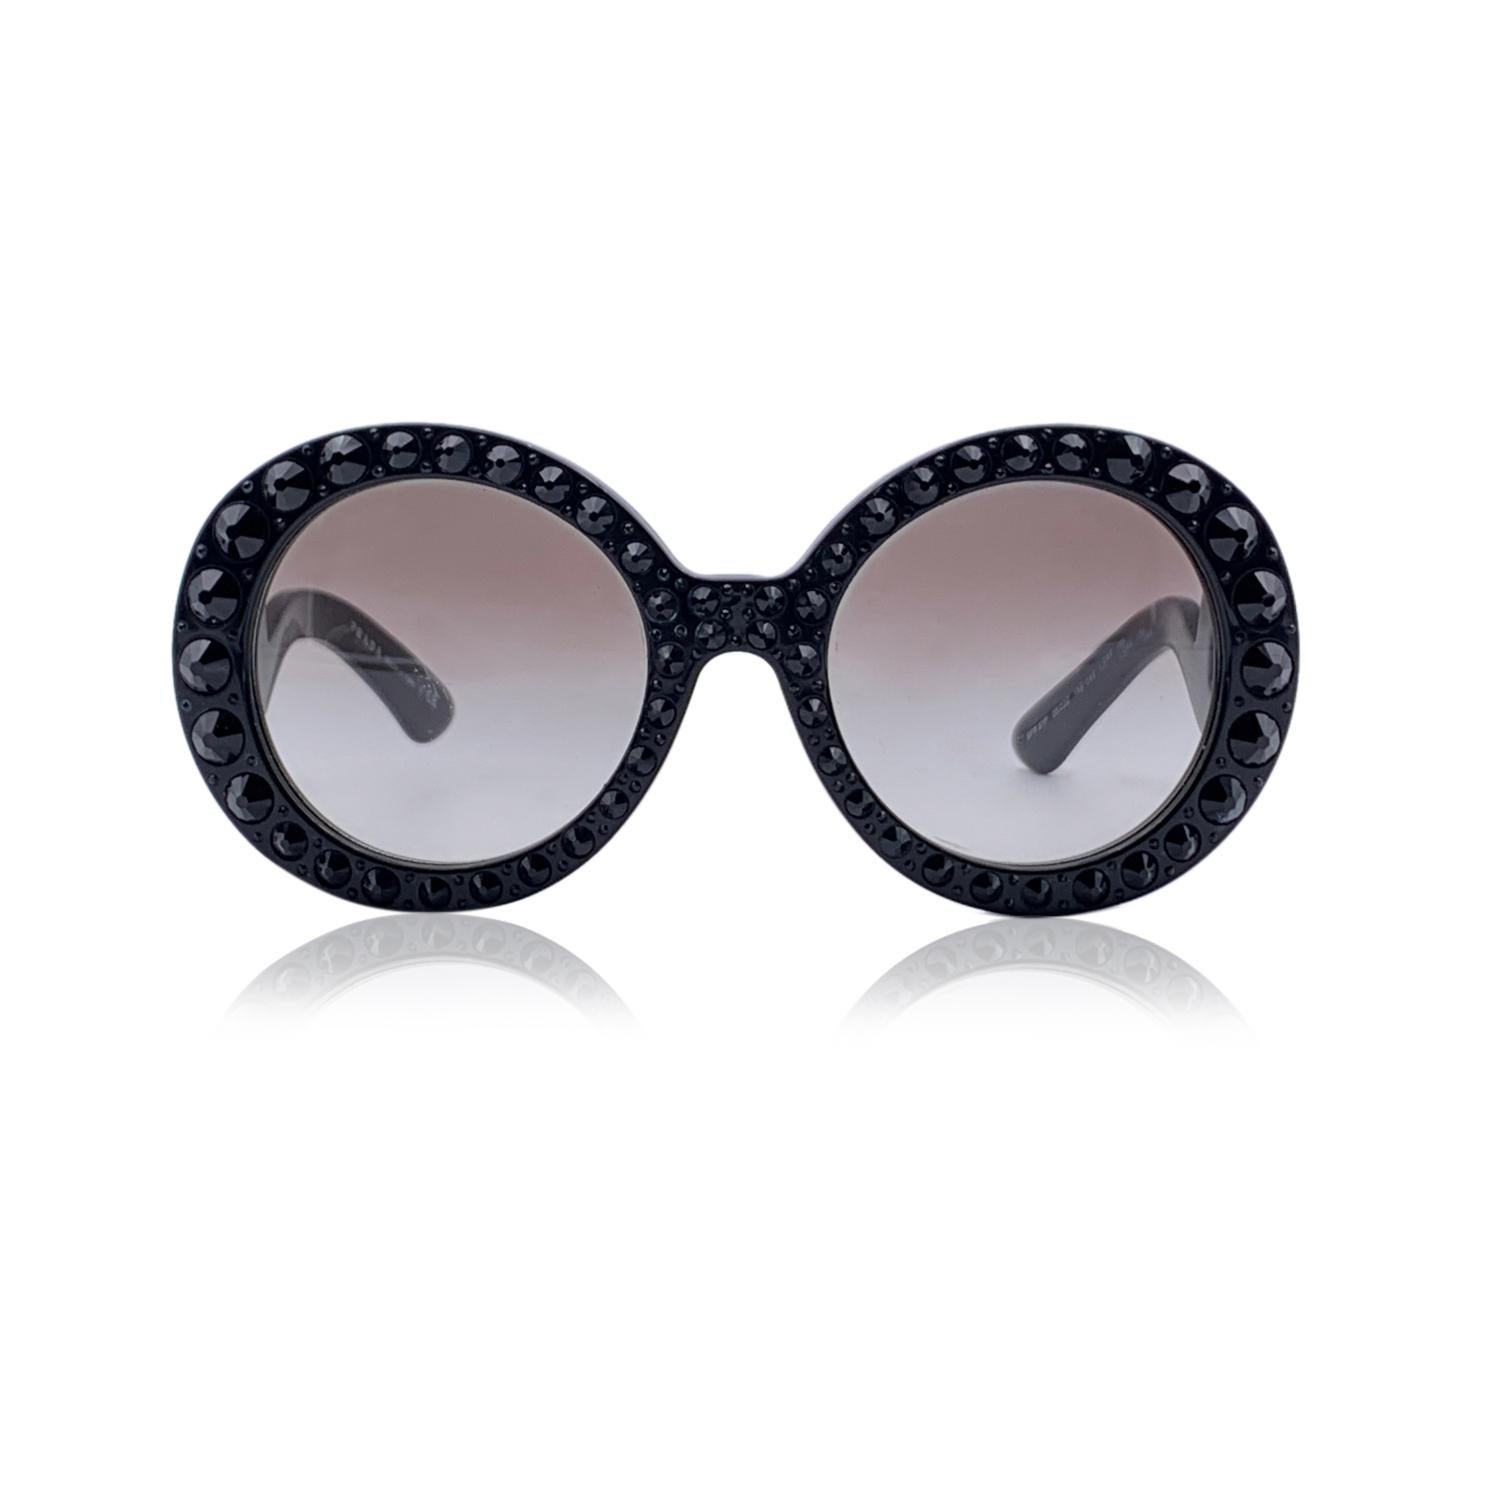 Stunning sunglasses by Prada, mod. SPR 31P col.1AB-0A7. Round oversized shape in black acetate embellished with black rhinestones. Logo at the end of the ear stems . Gradient light brown lenses. Mod & refs.: mod. SPR 31P - 55/22 - col.1AB-0A7 - 135